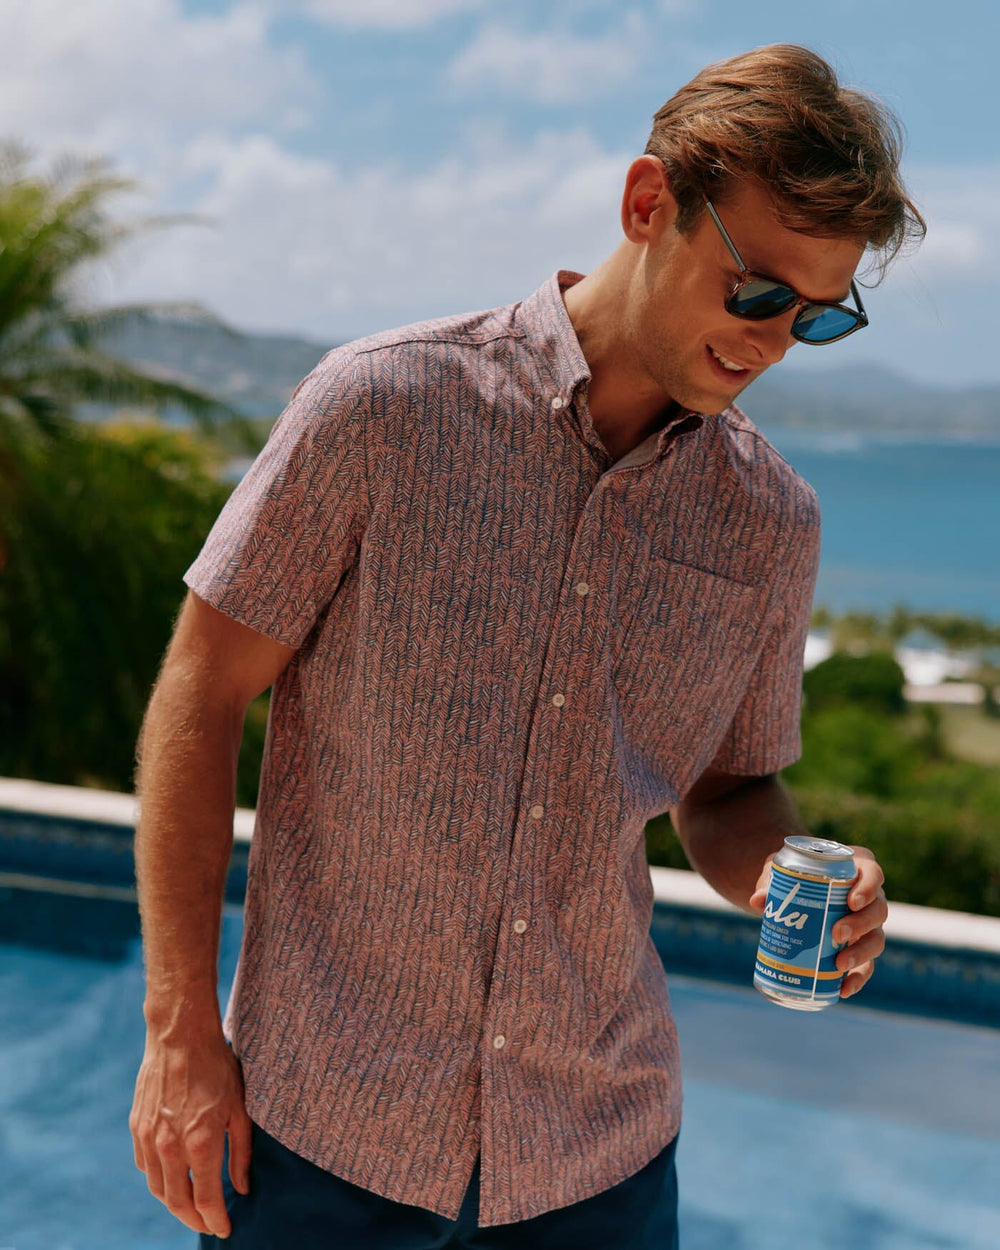 The front view of the Southern Tide Leagally Frond Intercoastal Short Sleeve Sport Shirt by Southern Tide - Flamingo Pink